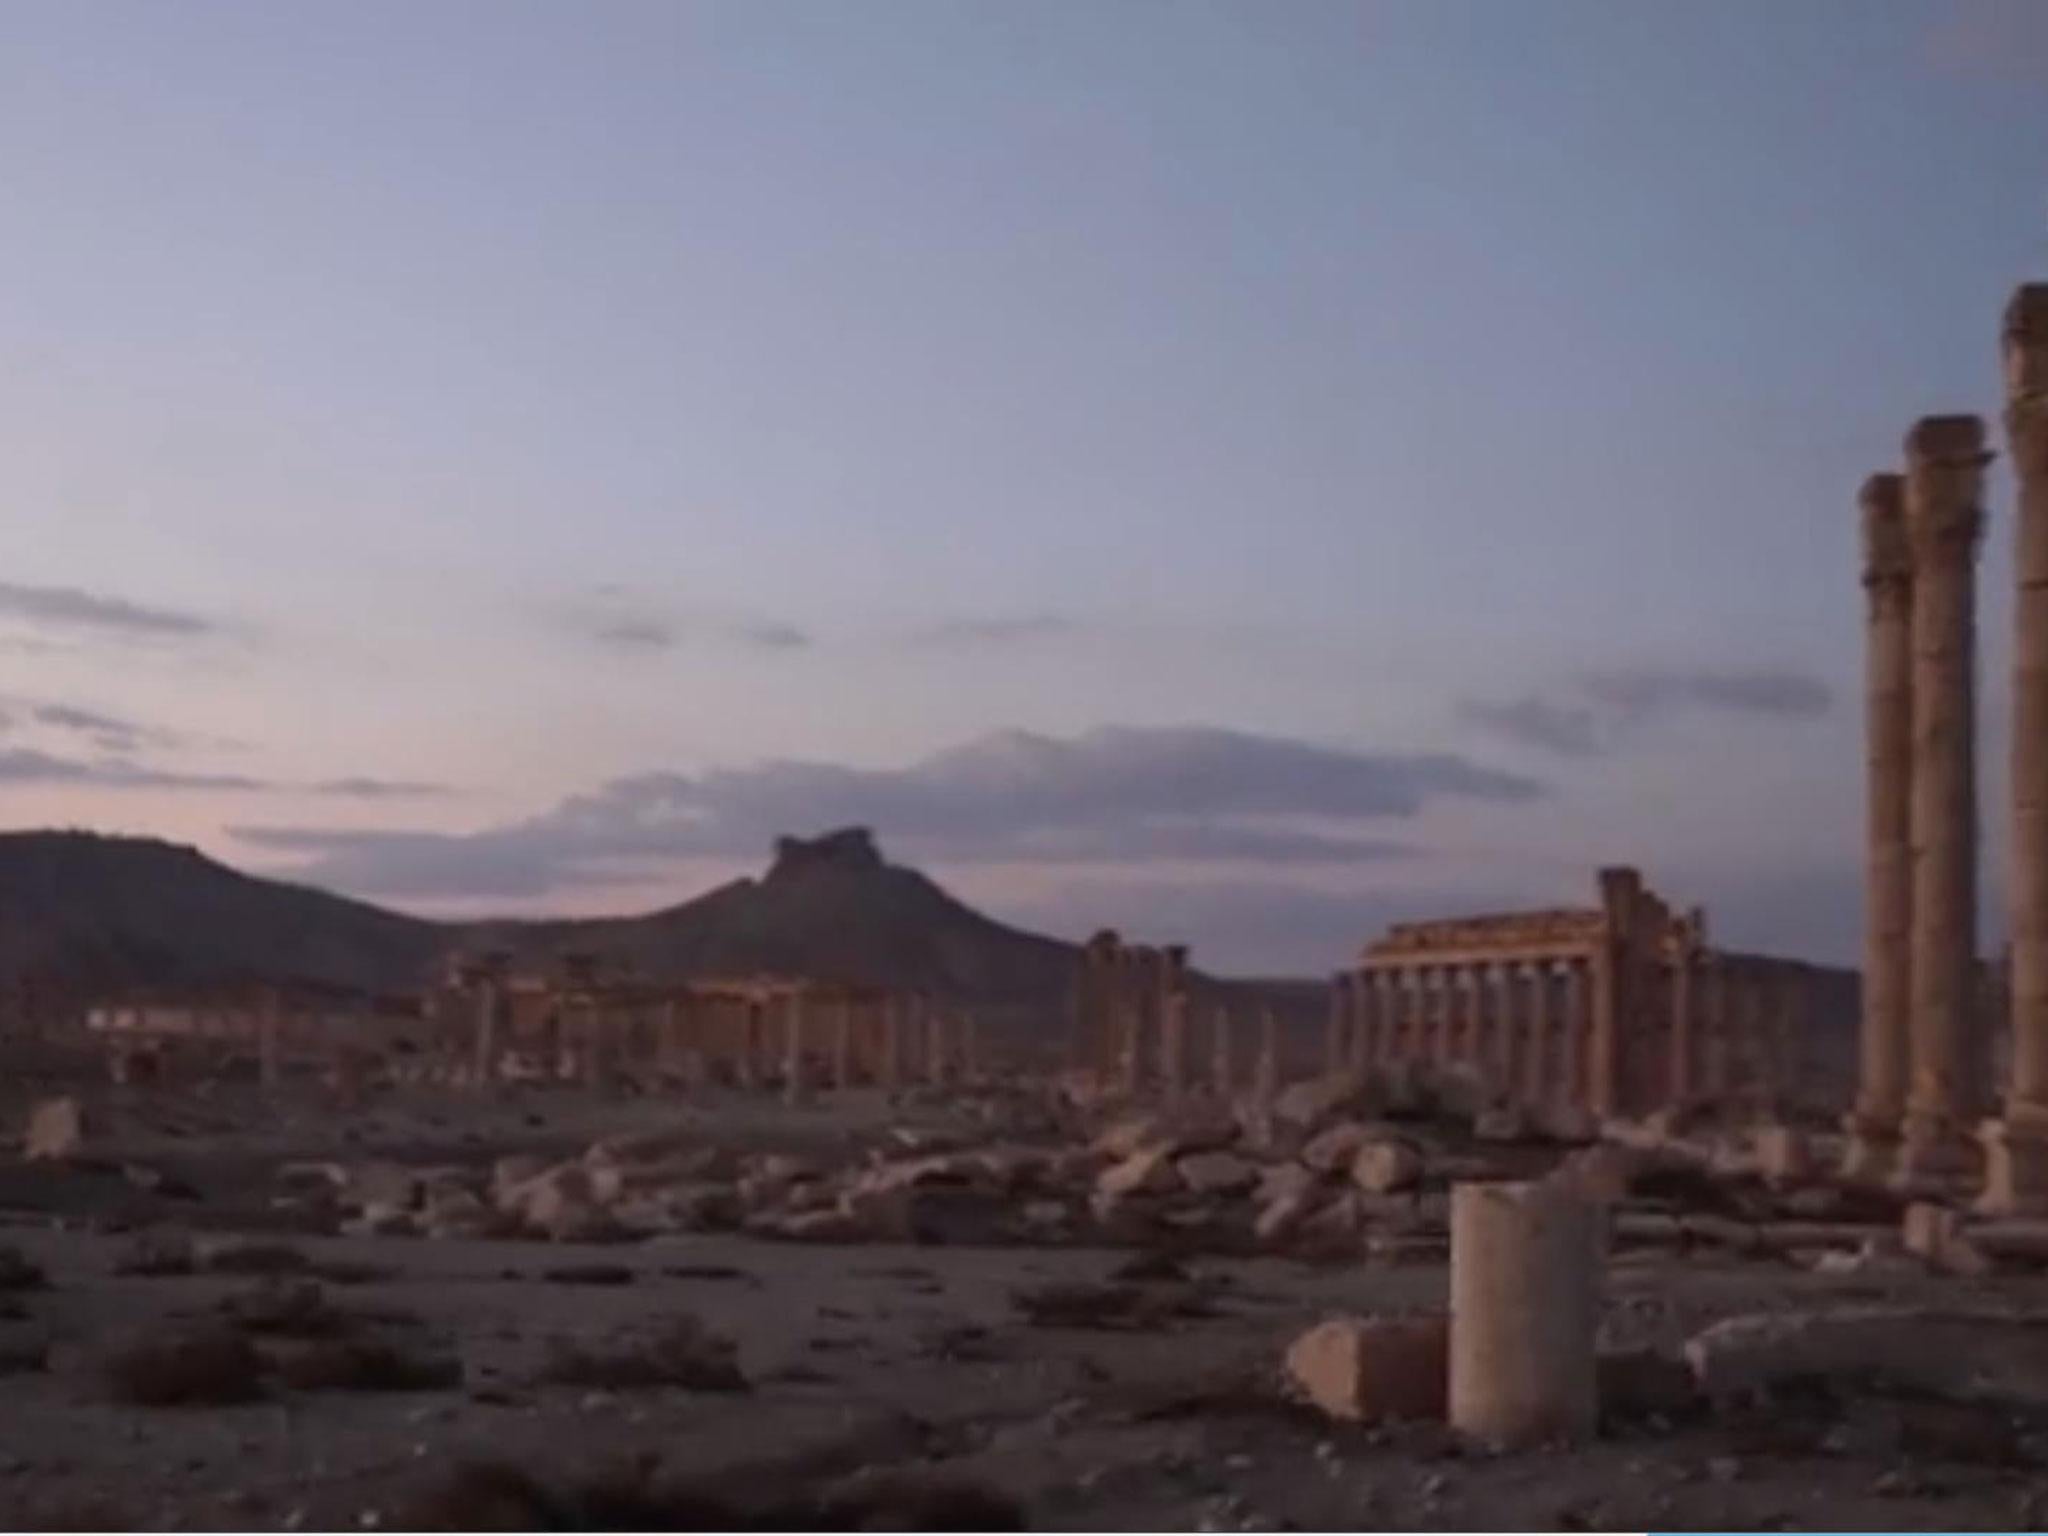 The ancient city of Palmyra shown in an Isis propaganda video after the group recaptured the city on 10 December